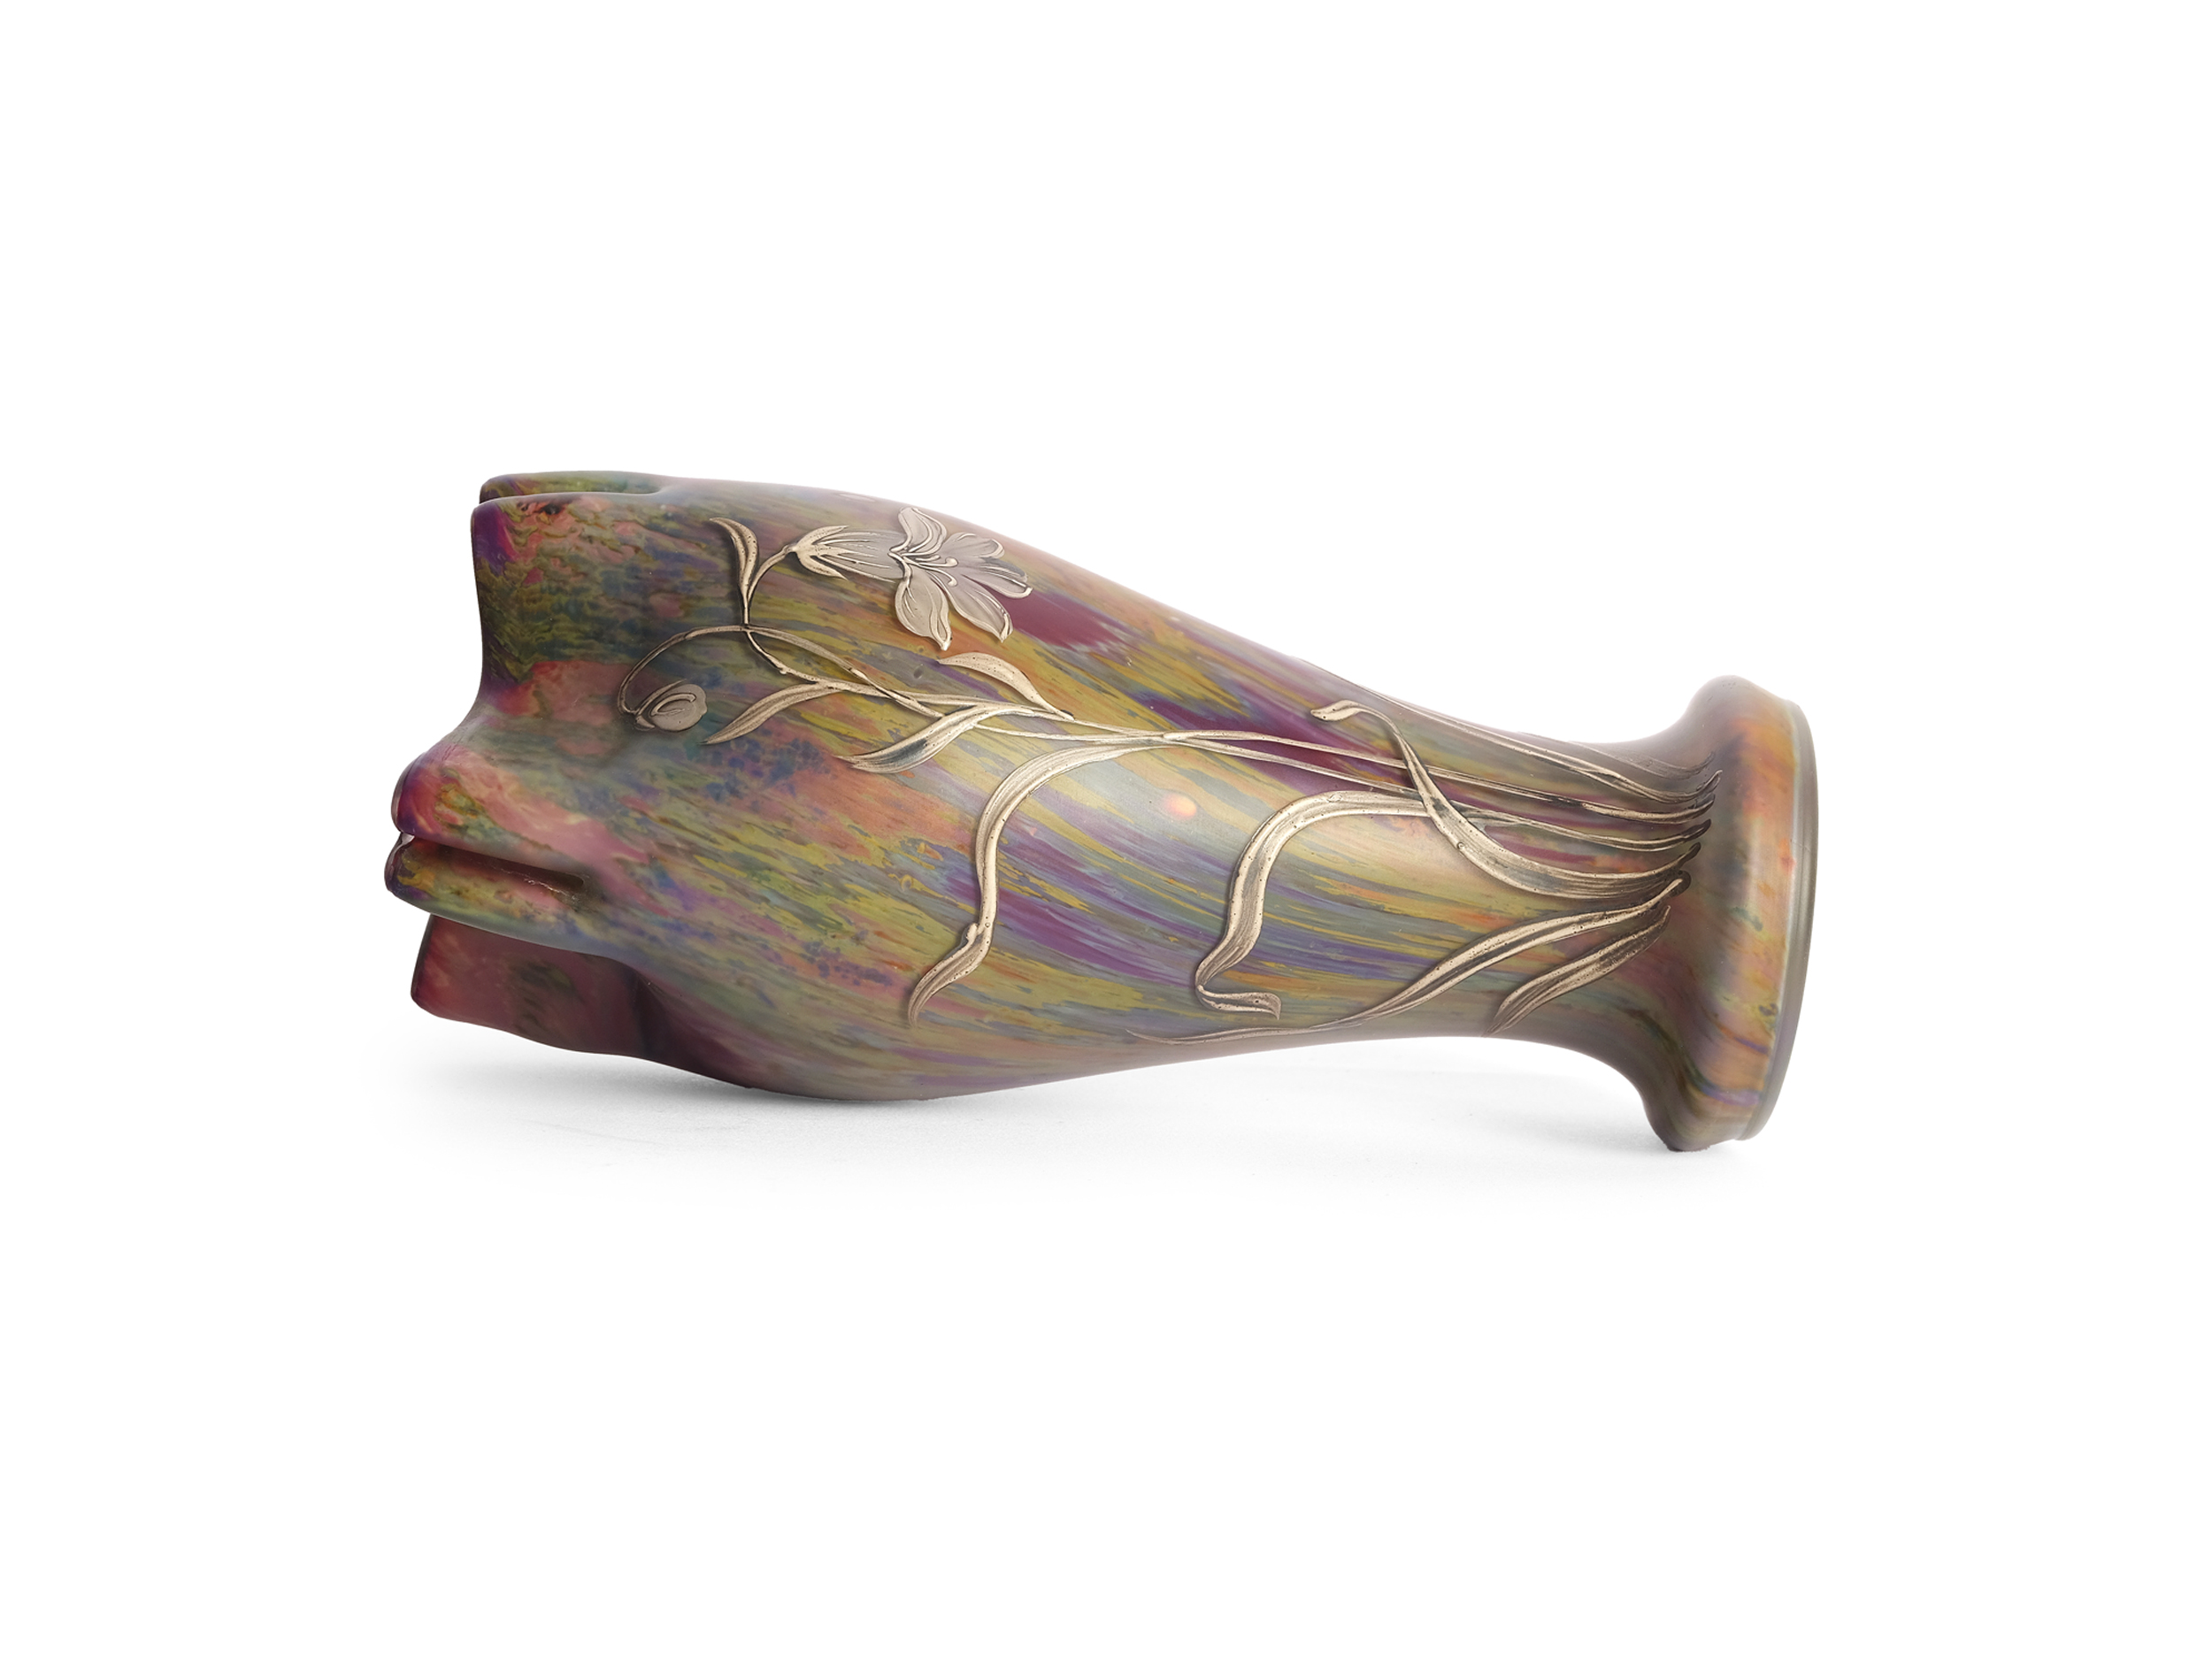 Vase with bellflower in relief, Art Nouveau, around 1900 - Image 5 of 5